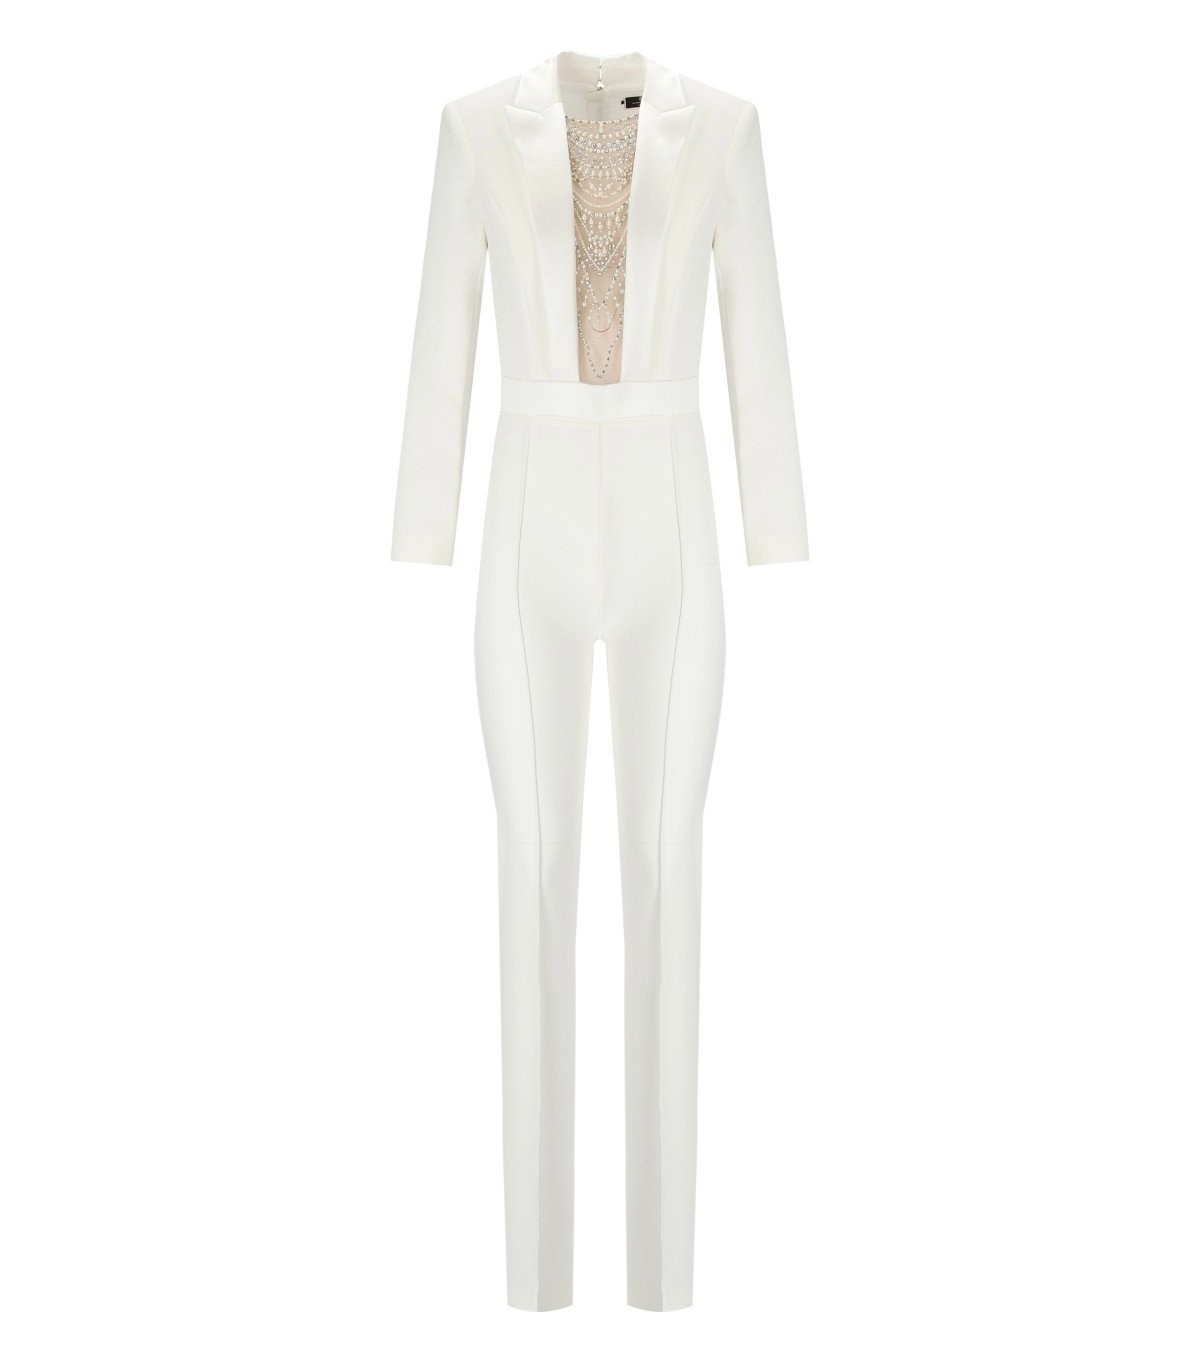 ELISABETTA FRANCHI IVORY JUMPSUIT WITH PEARLS AND RHINESTONES